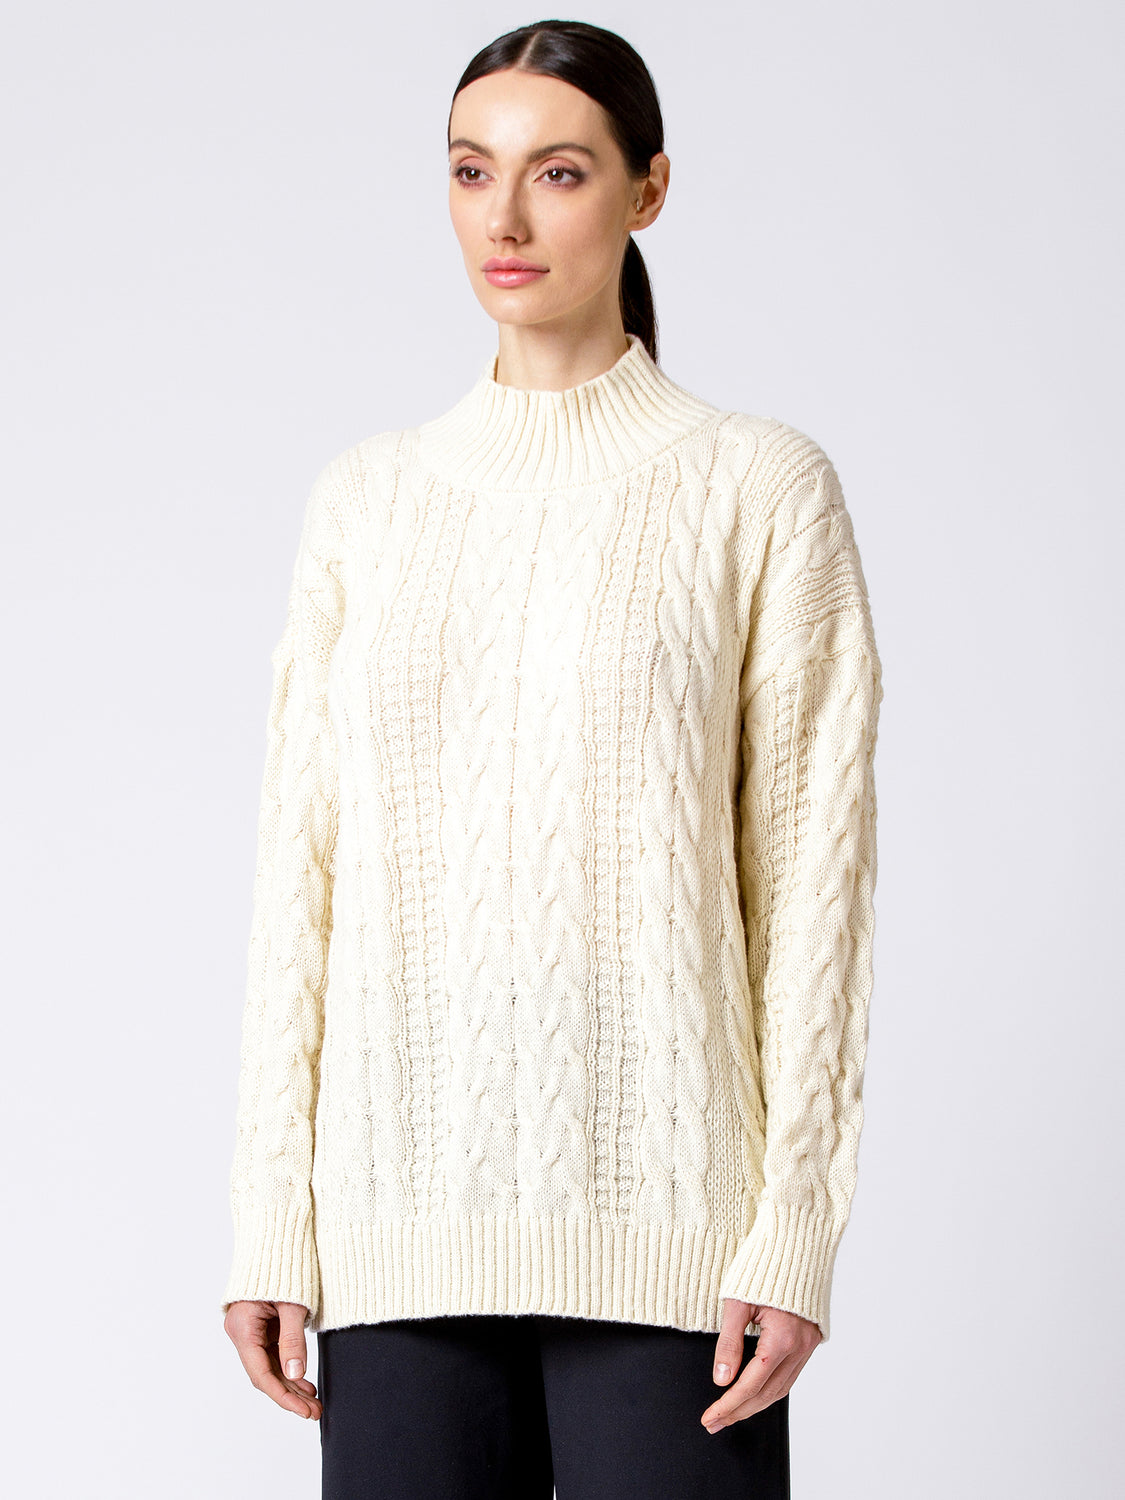 VINTAGE MOCK NECK OVERSIZED CABLE KNIT SWEATER, CREAM